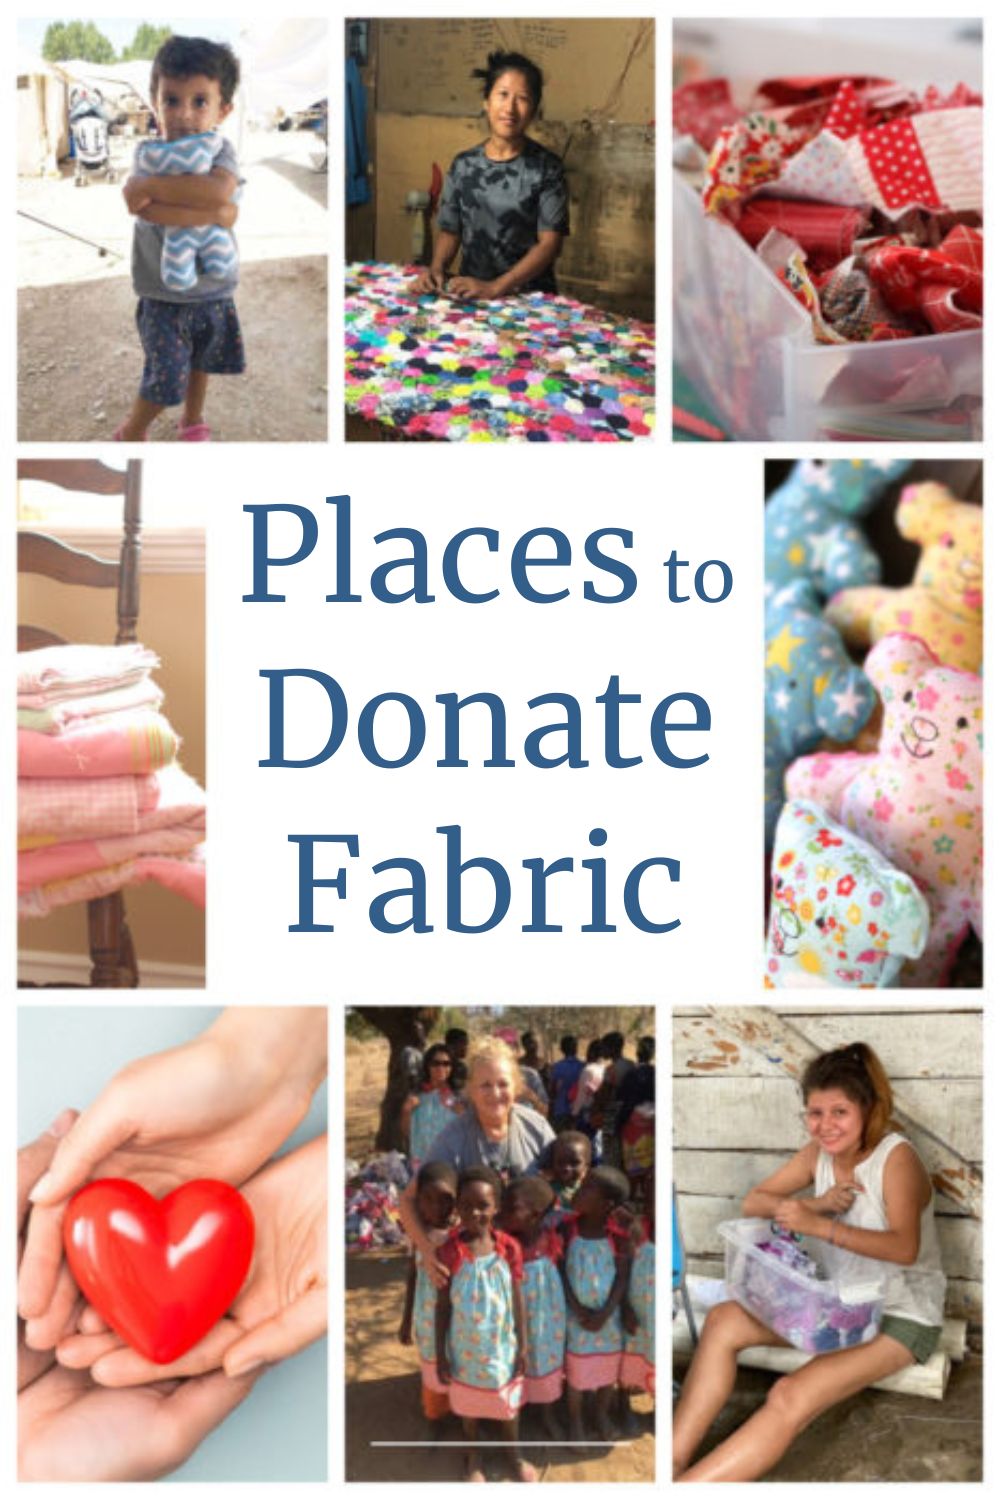 Charities in need of fabric, thread, and batting donations.